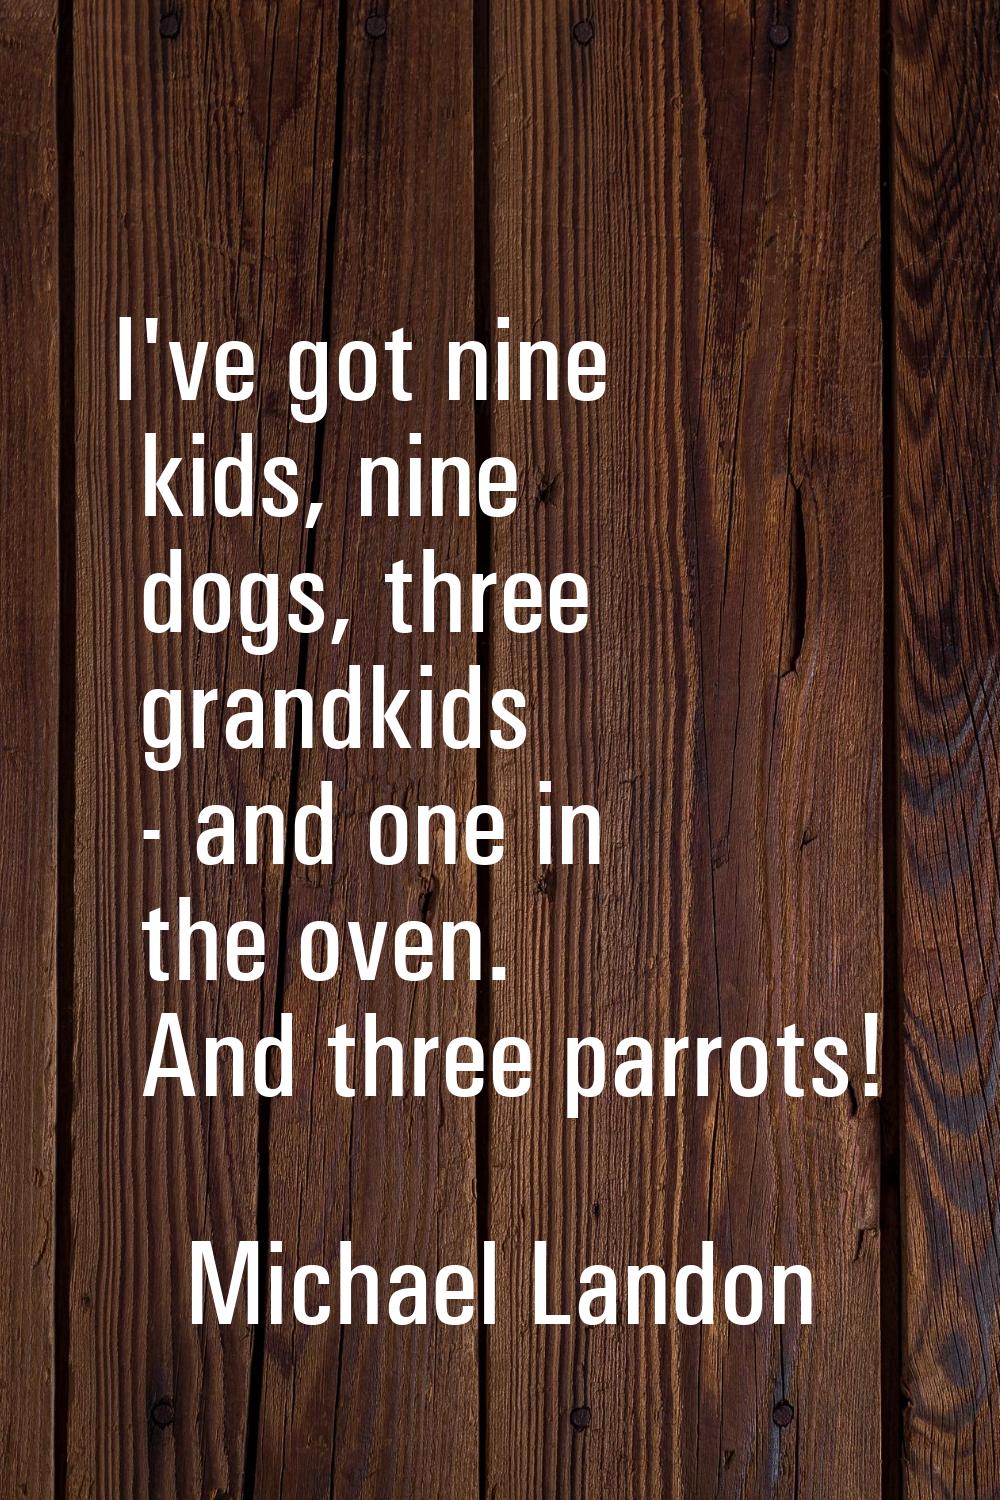 I've got nine kids, nine dogs, three grandkids - and one in the oven. And three parrots!